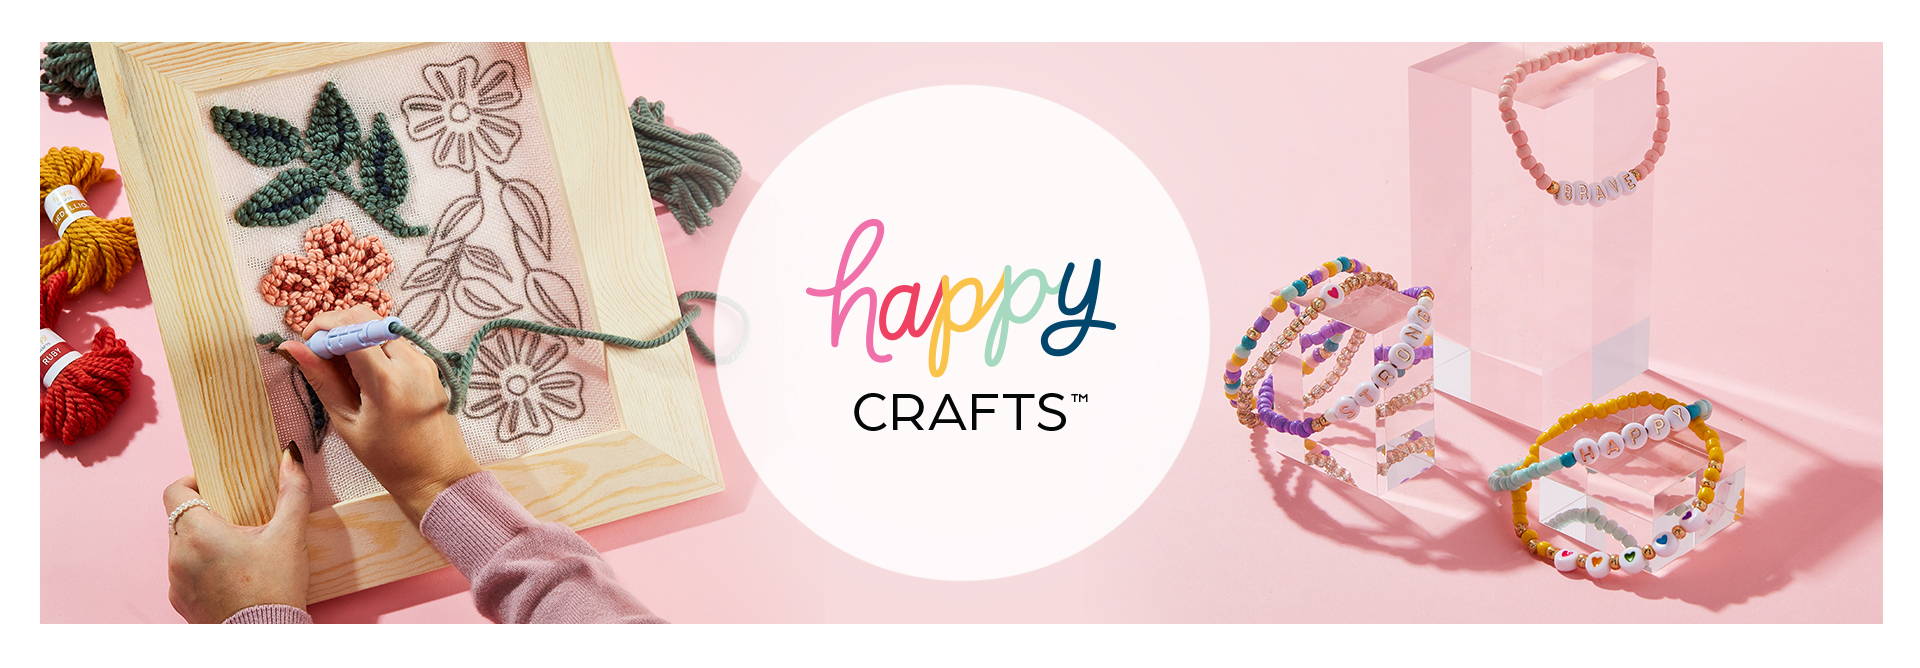 DIY CRAFTS FOR ADULTS  HAPPY CRAFTS – The Happy Planner